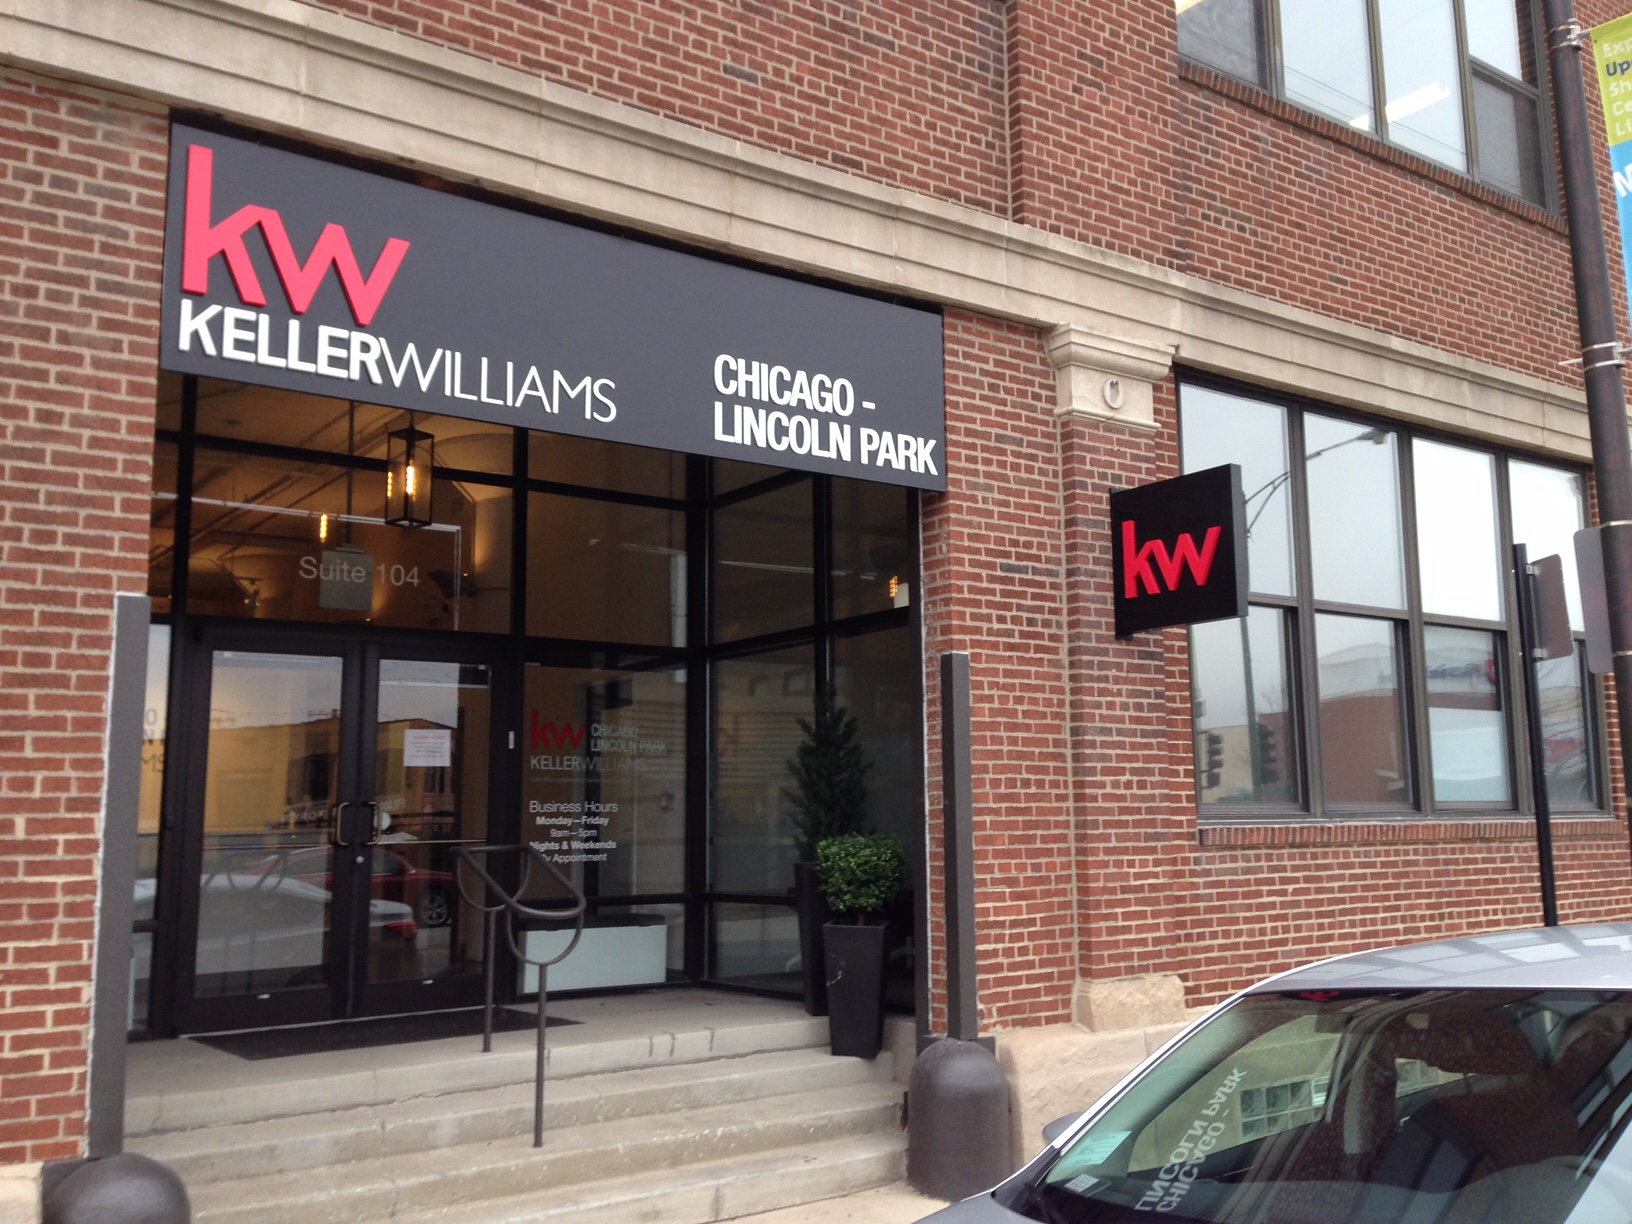 An outdoor sign and logo for Keller Williams 